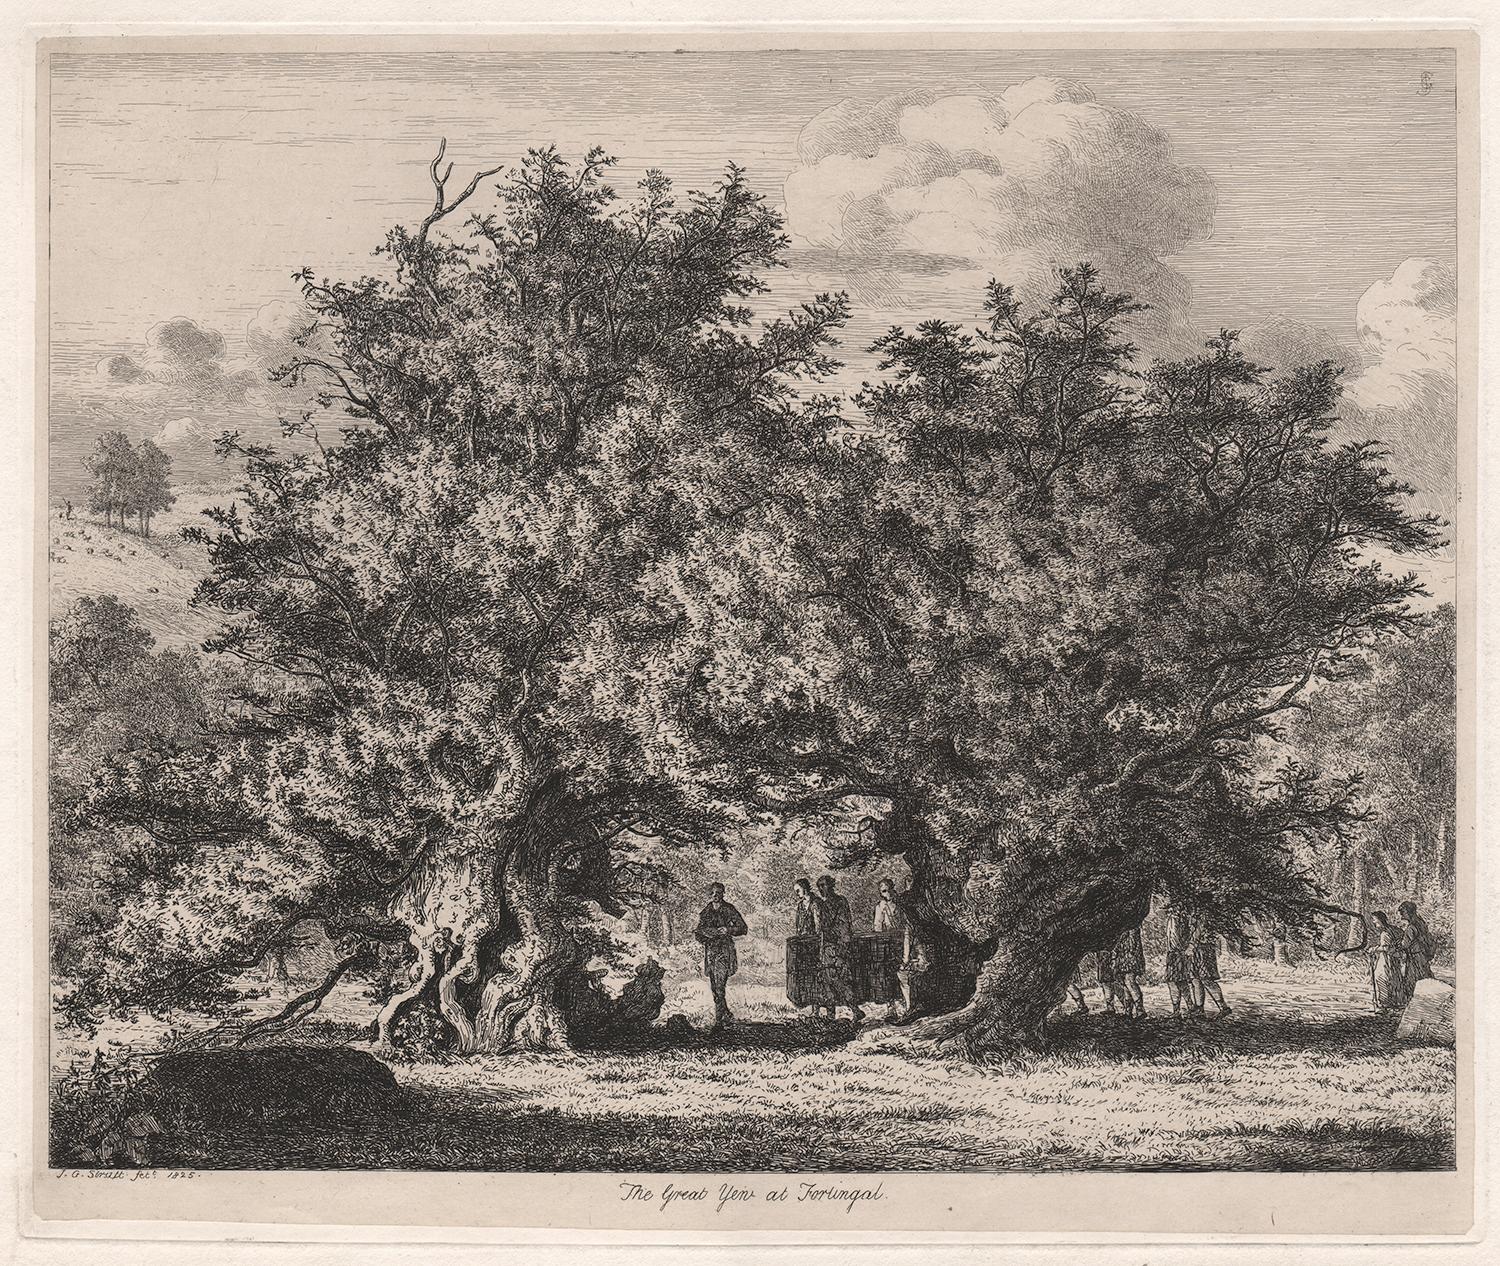 'The Great Yew at Forlingal'

India-laid etching, 1825, by Jacob George Strutt (1784-1867).

From Strutt's series of etchings titled 'Sylva Britannica or Portraits of Forest Trees'. 

The Fortingall Yew is an ancient yew in the churchyard of the